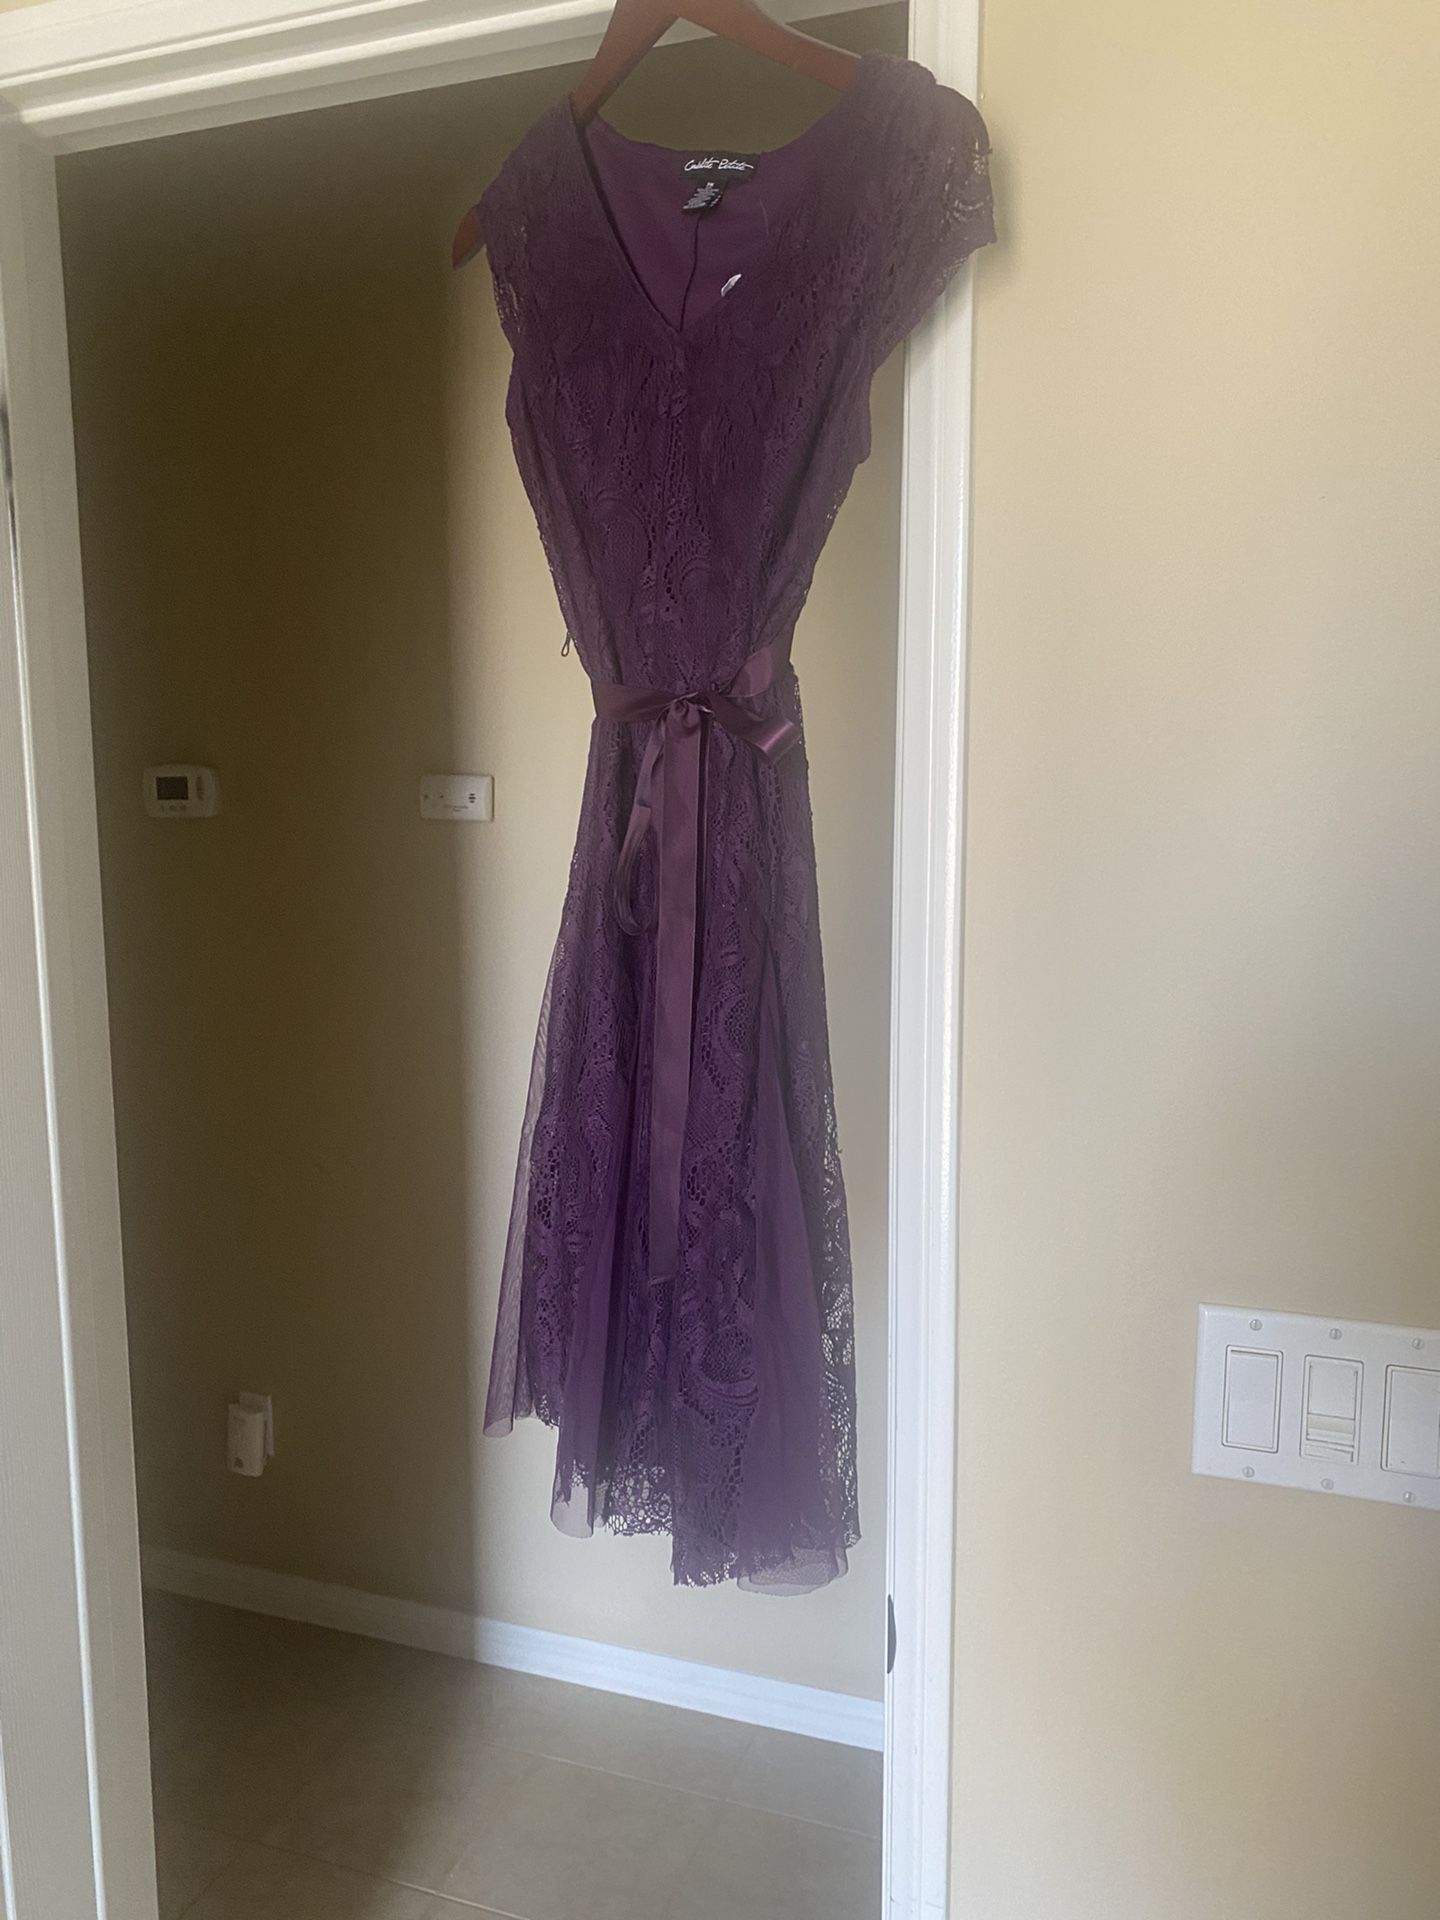 Dress, Purple  Size PM   (probably Size 5 or 7)  